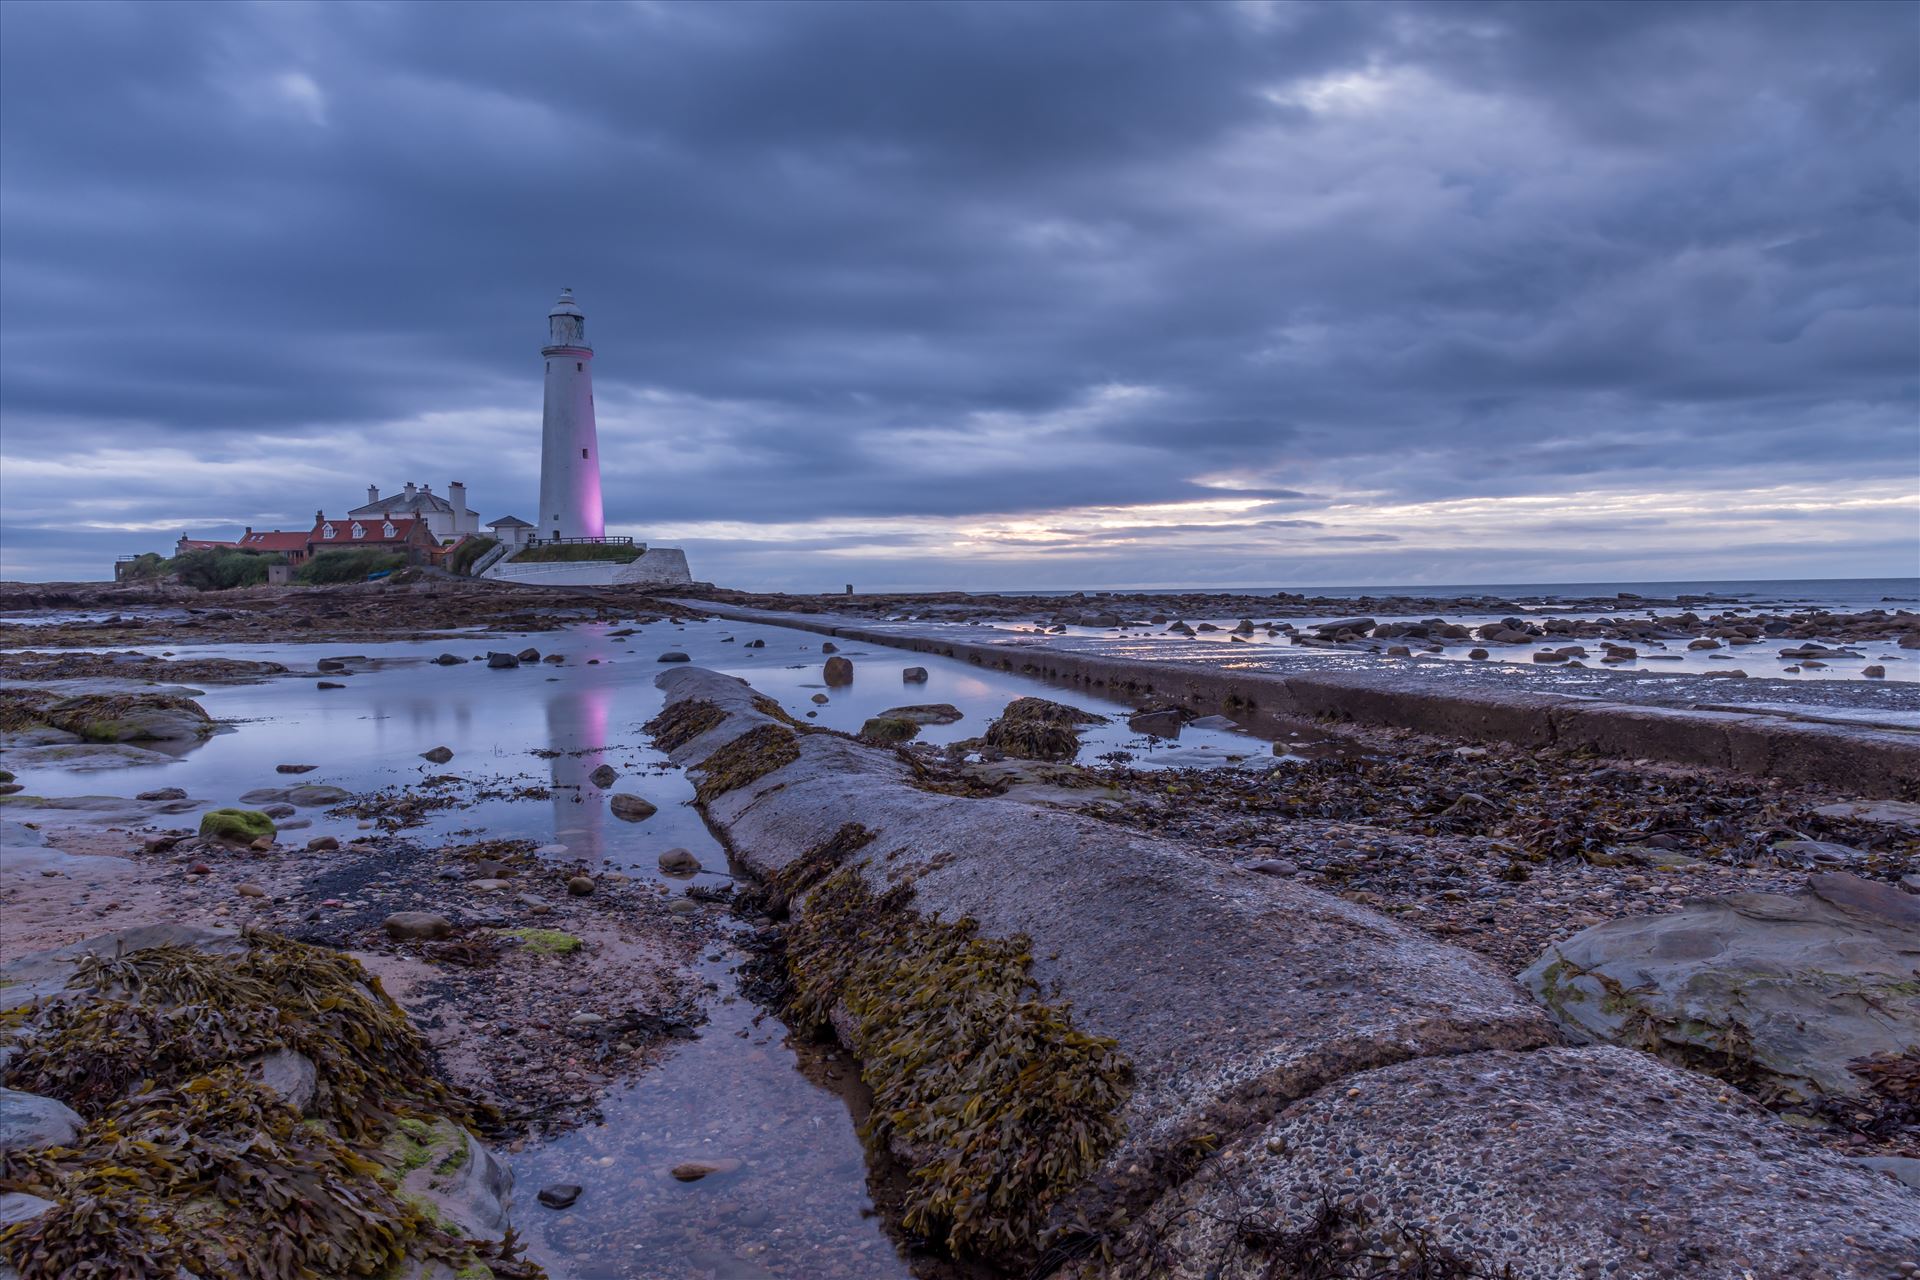 St Mary`s lighthouse, Whitley Bay - St Mary`s lighthouse stands on a small rocky tidal island is linked to the mainland by a short concrete causeway which is submerged at high tide. The lighthouse was built in 1898 & was decommissioned in 1984, 2 years after becoming automatic. by philreay